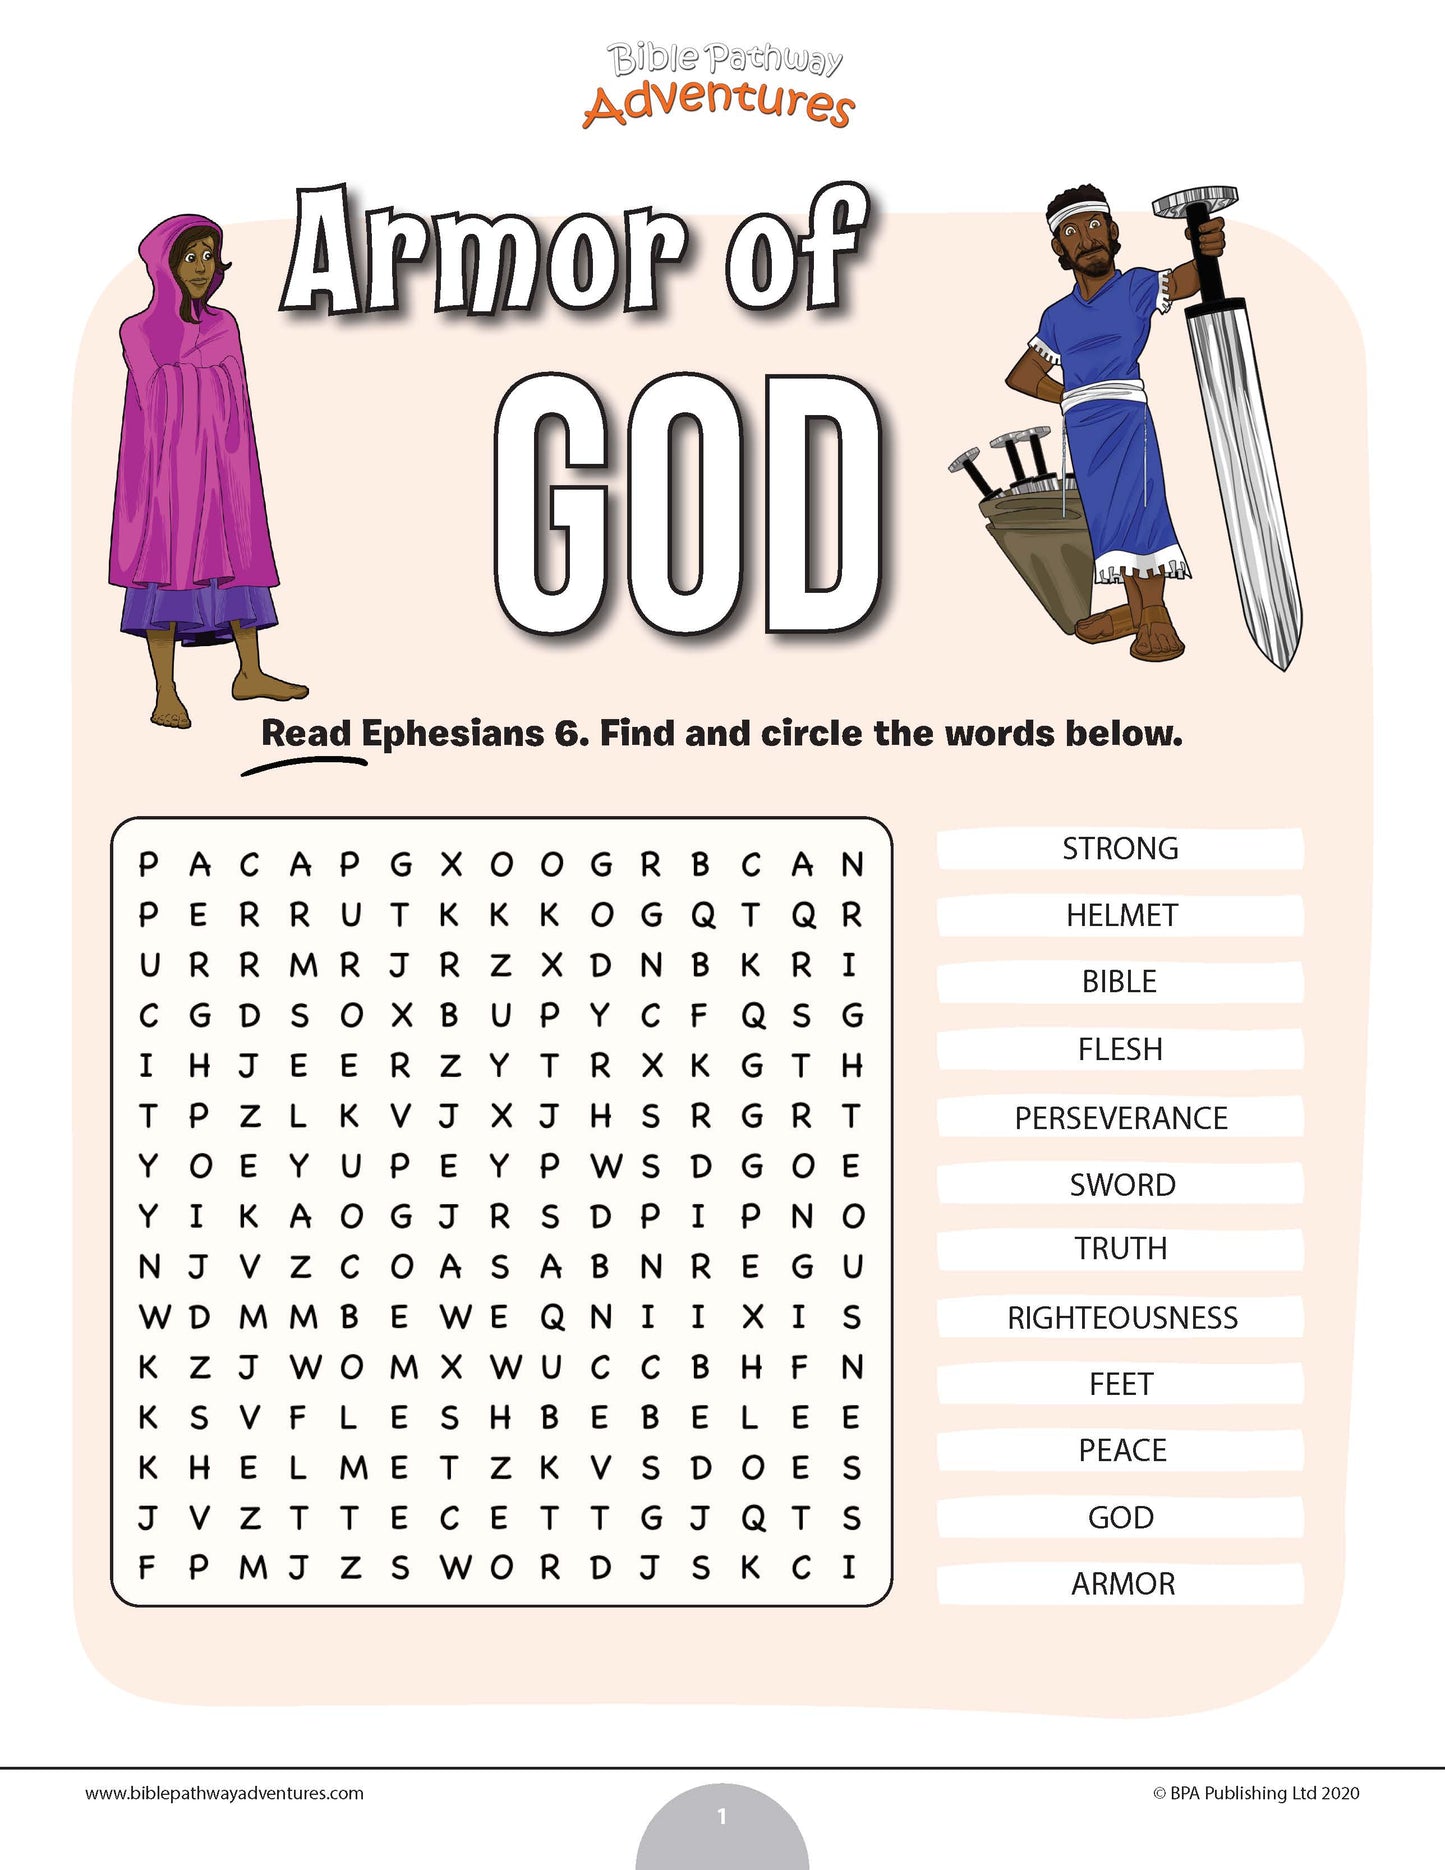 Armor of God word search